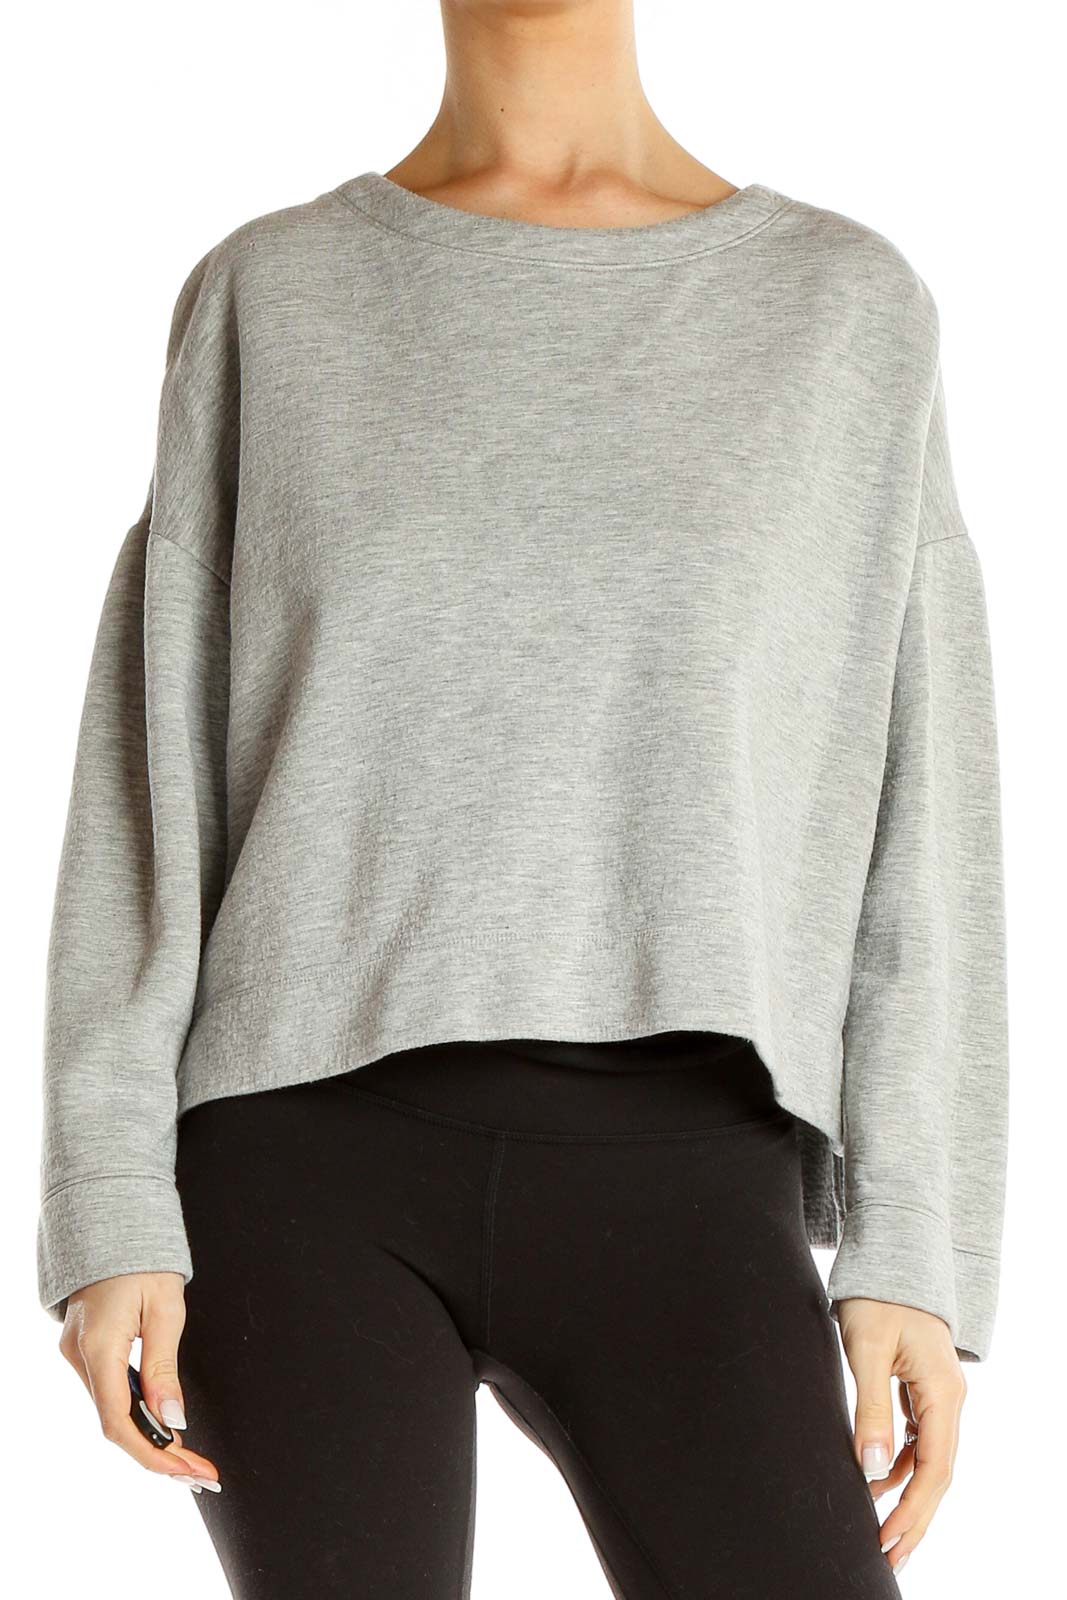 Gray Cropped Sweater Front